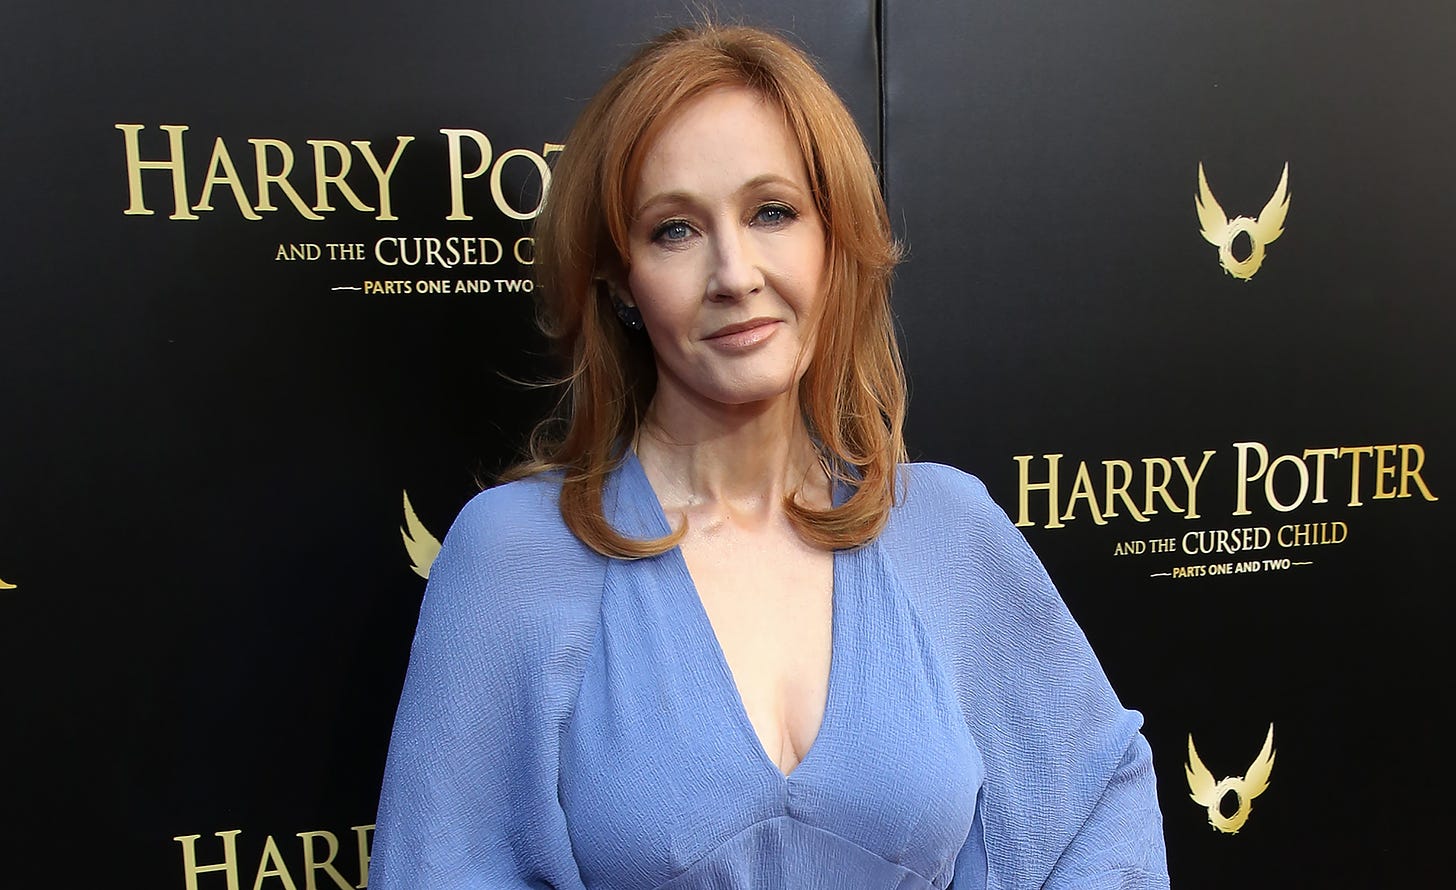 J.K. Rowling doubles down in what some critics call a 'transphobic  manifesto'